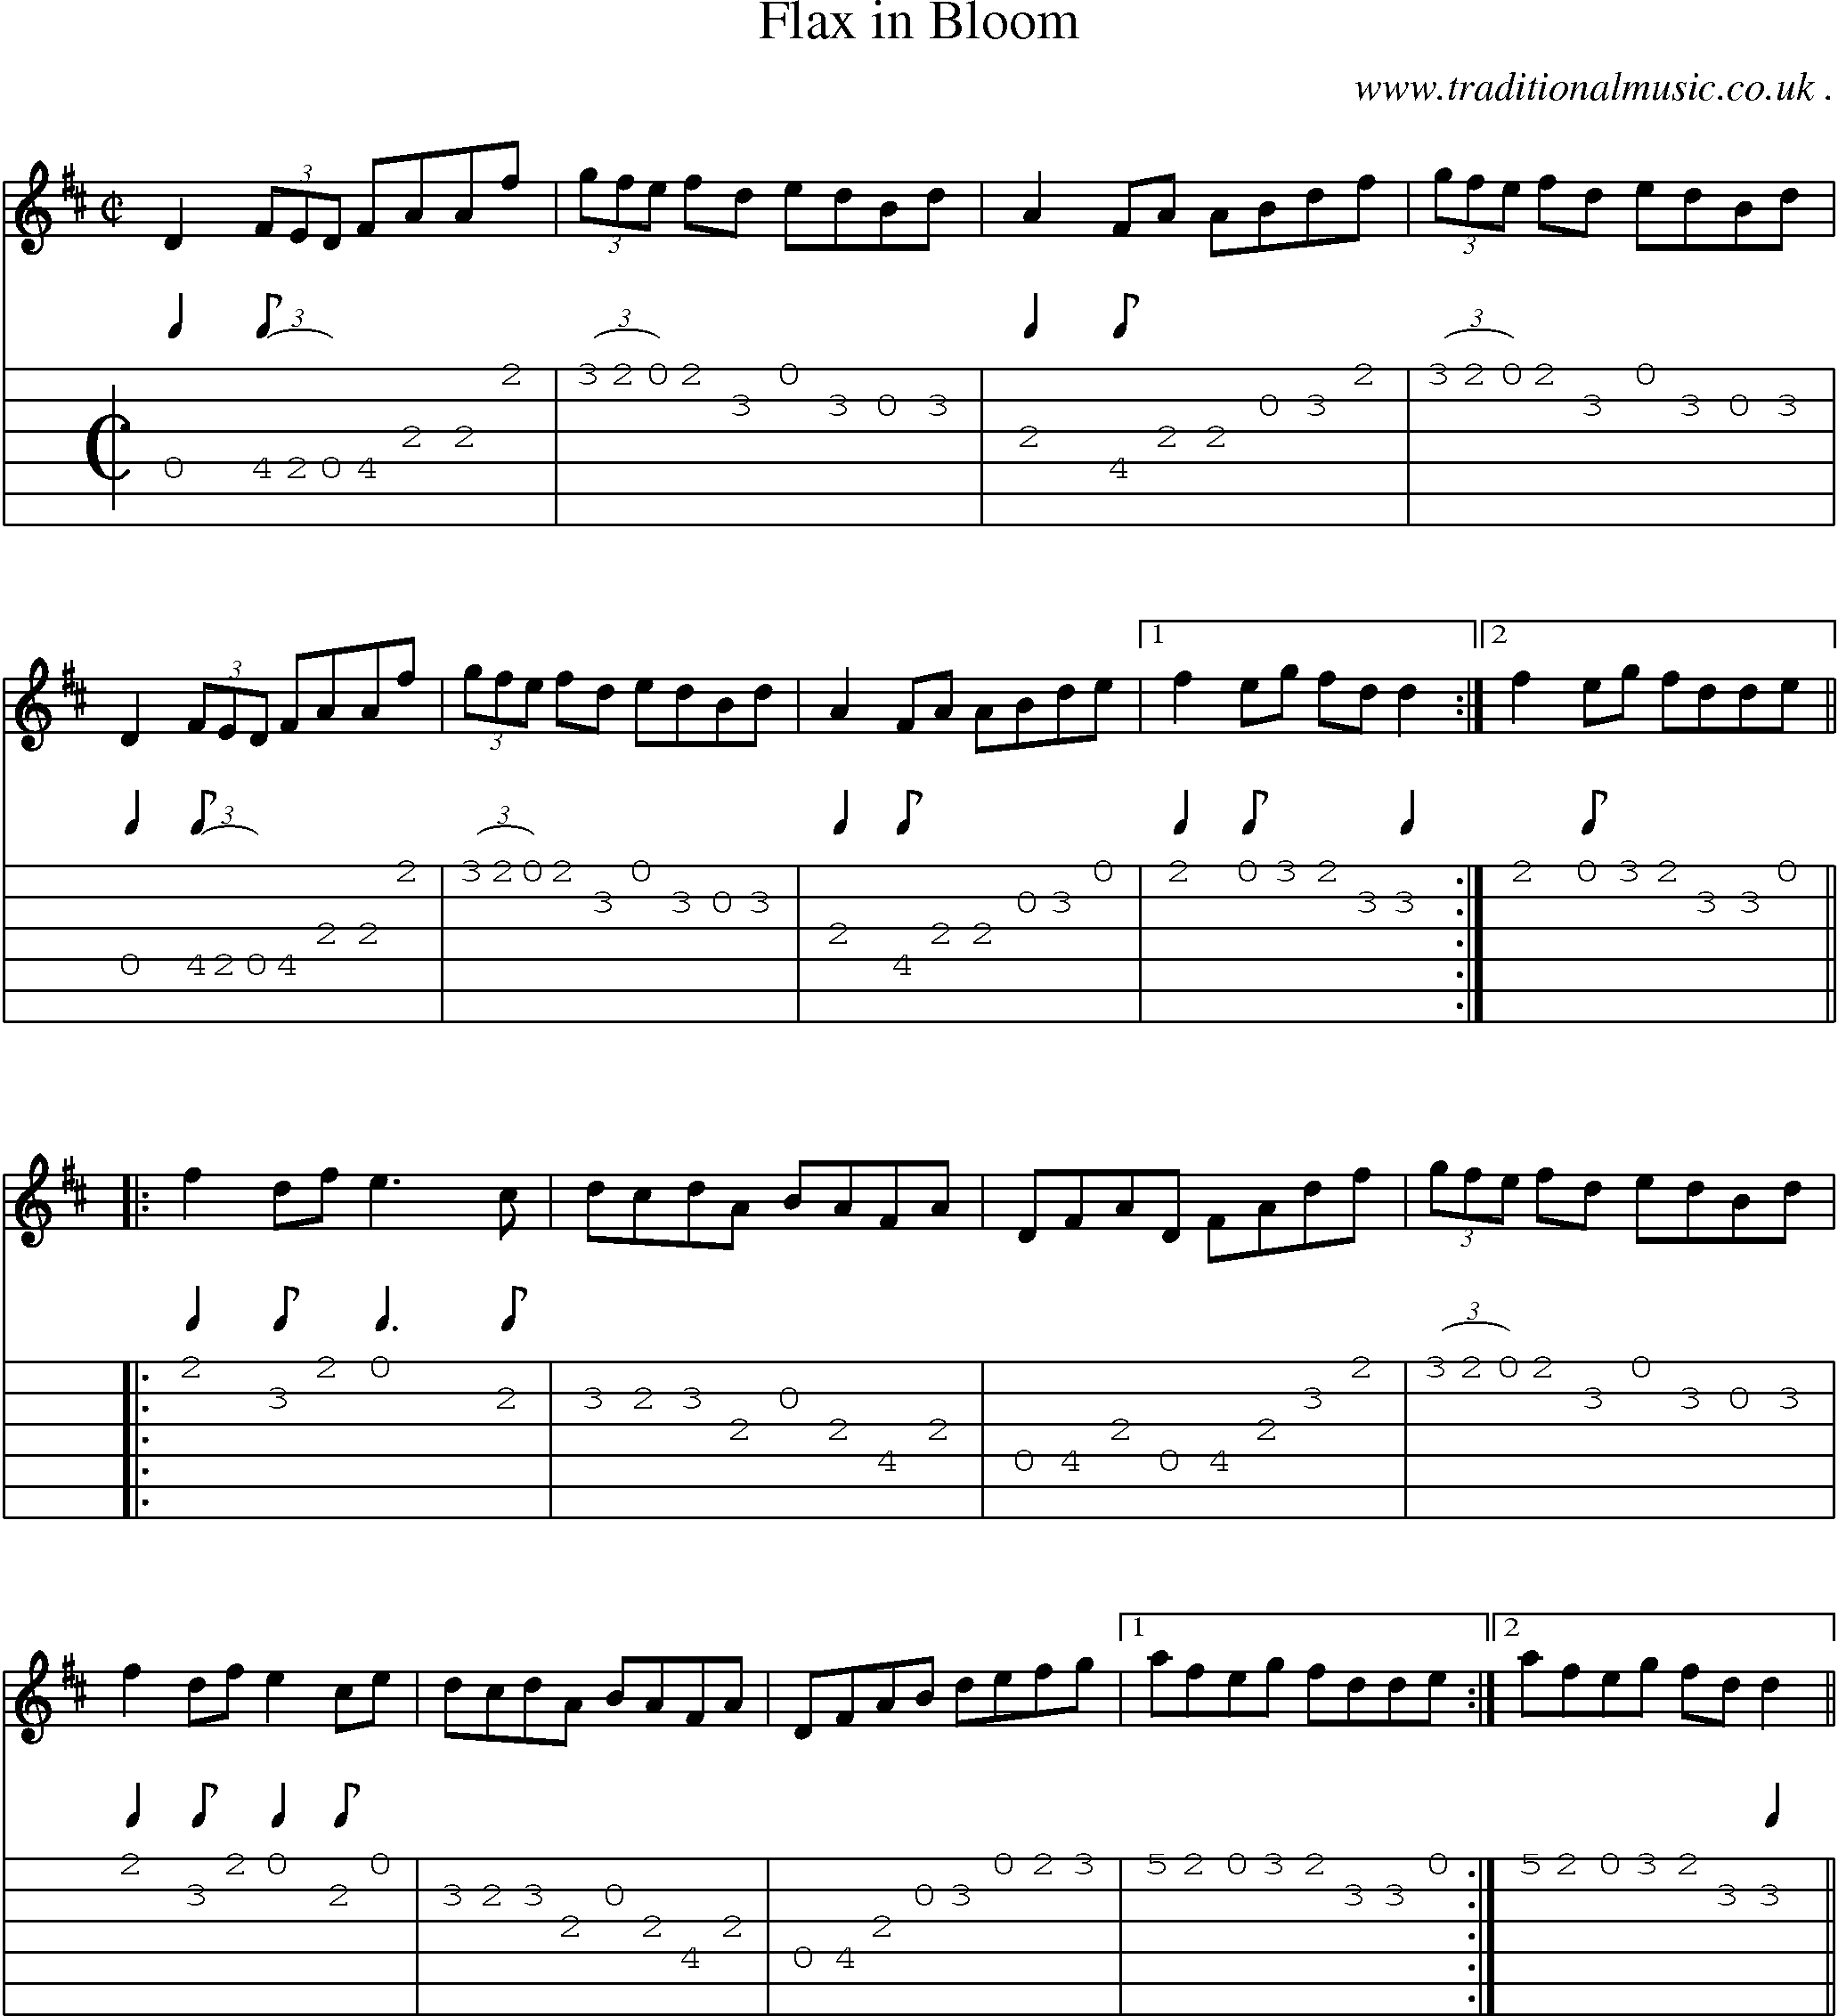 Sheet-Music and Guitar Tabs for Flax In Bloom